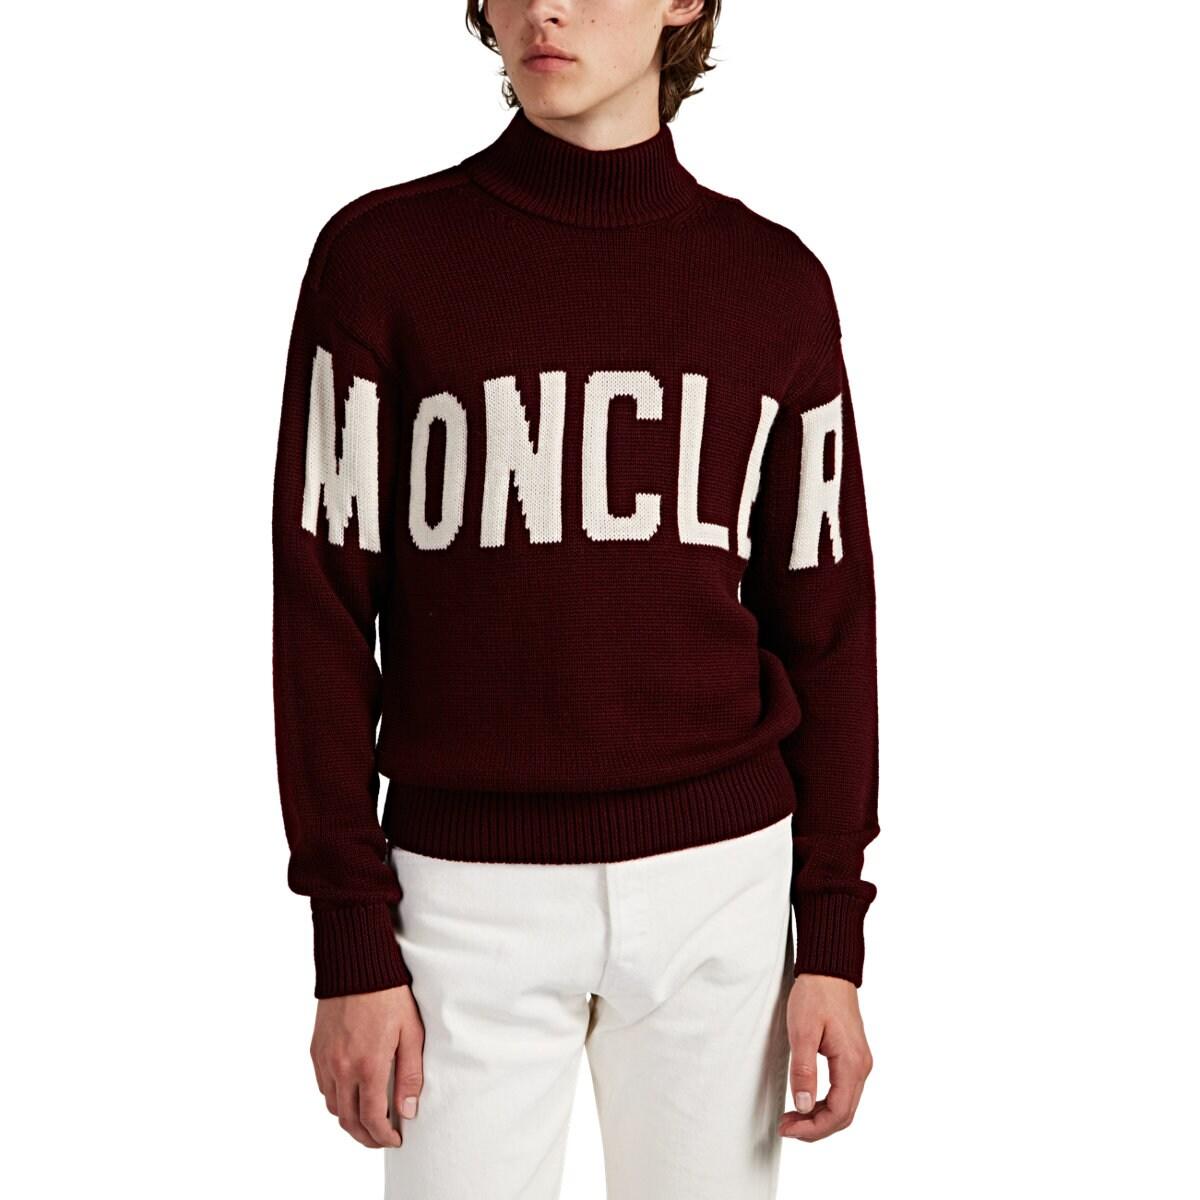 Moncler Logo-knit Wool Sweater in Red for Men - Lyst